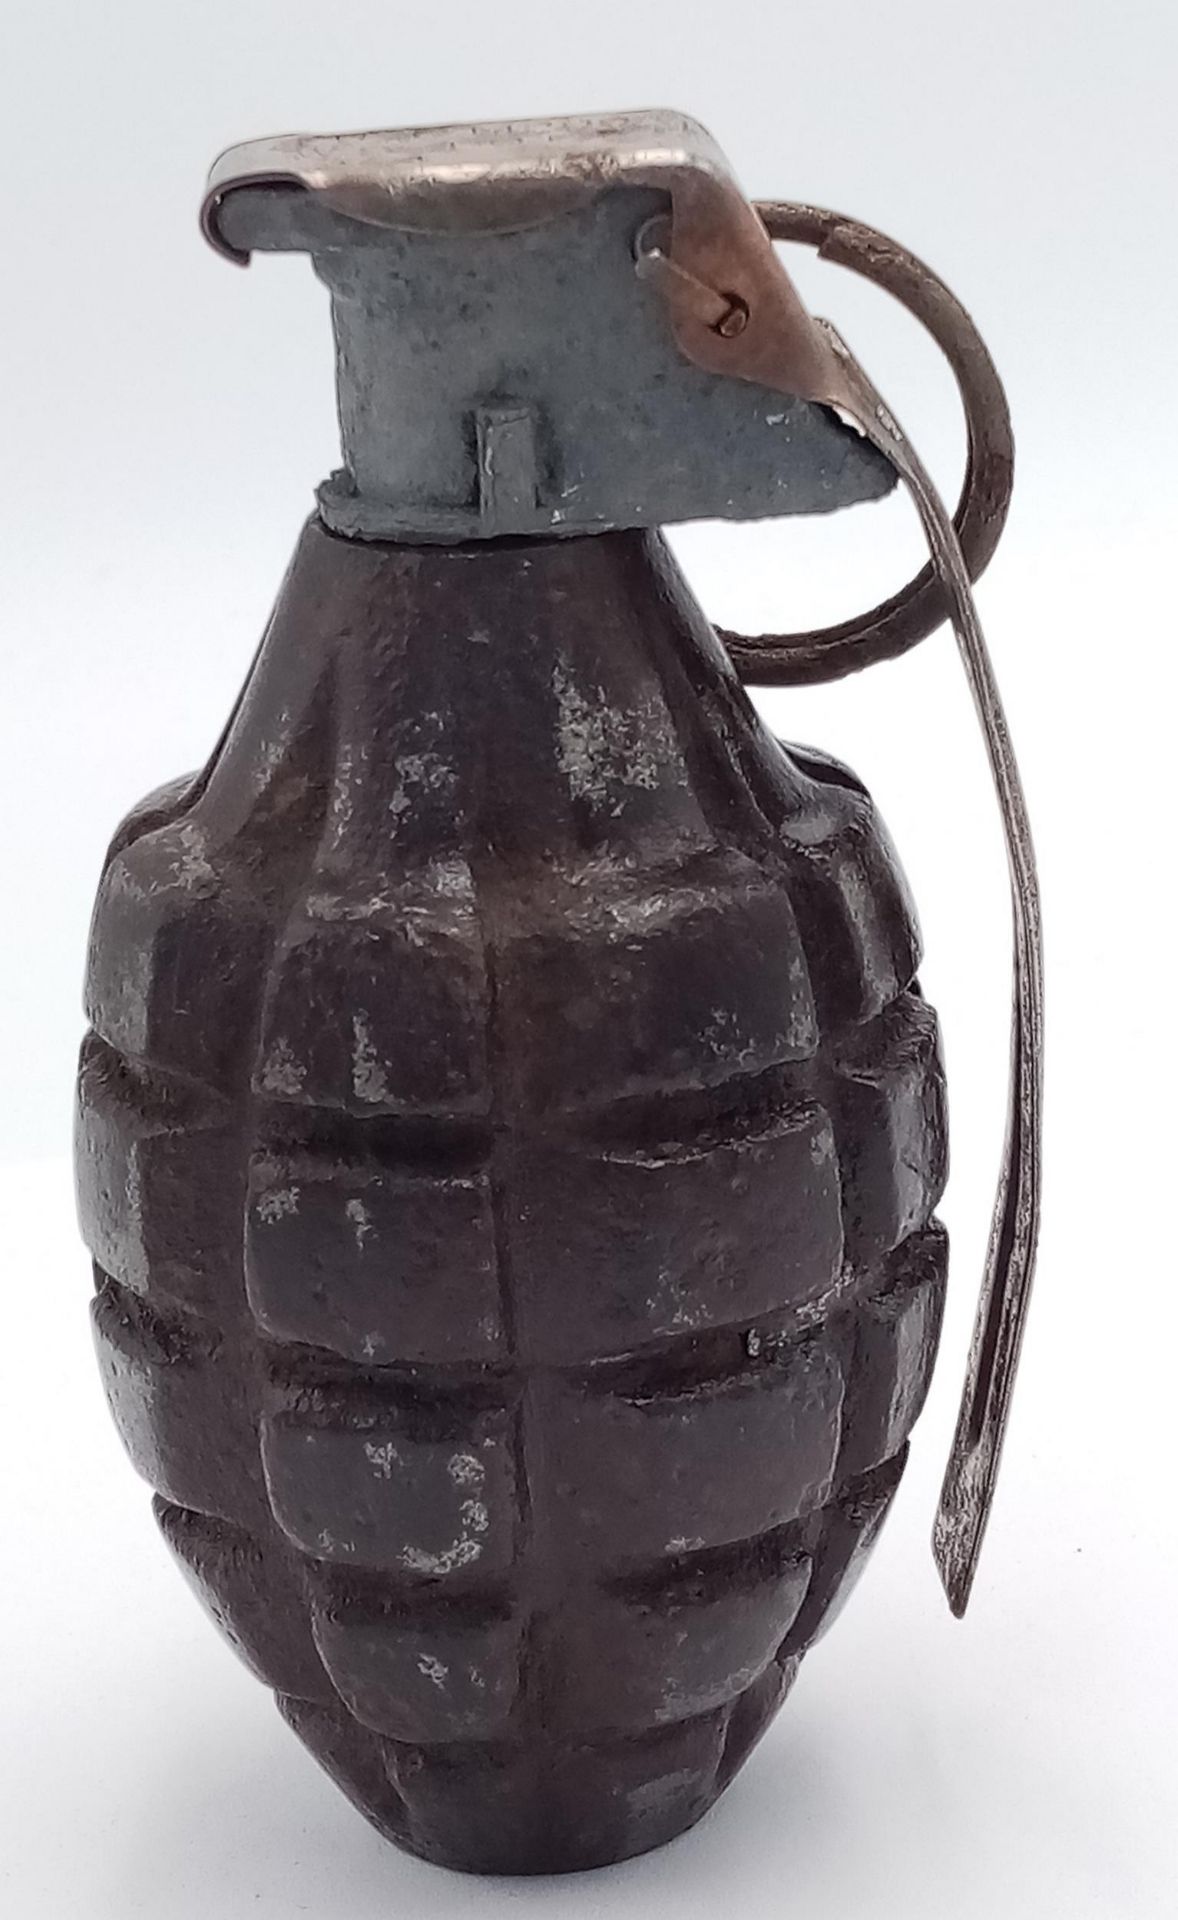 INERT WW2 Normandy Relic US Pineapple Grenade. This Grenade is one of several that were found in the - Image 2 of 5